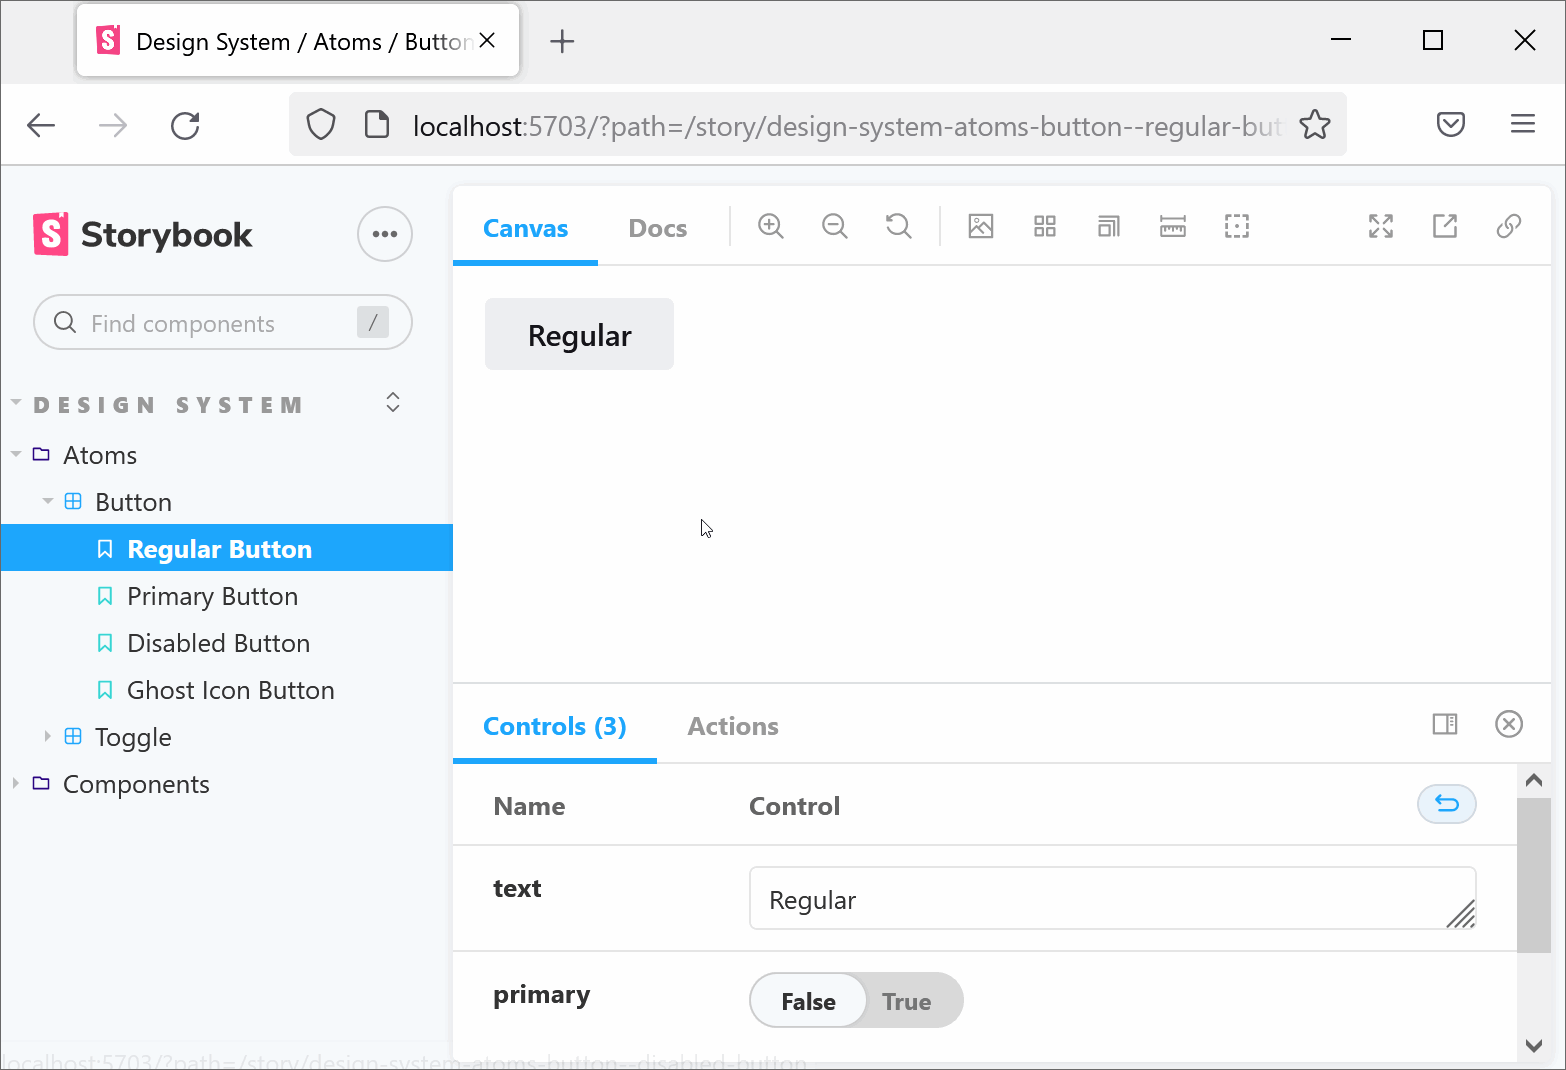 An animated GIF of the Storybook tool loaded in Firefox, showing a button component that can be put into various states.